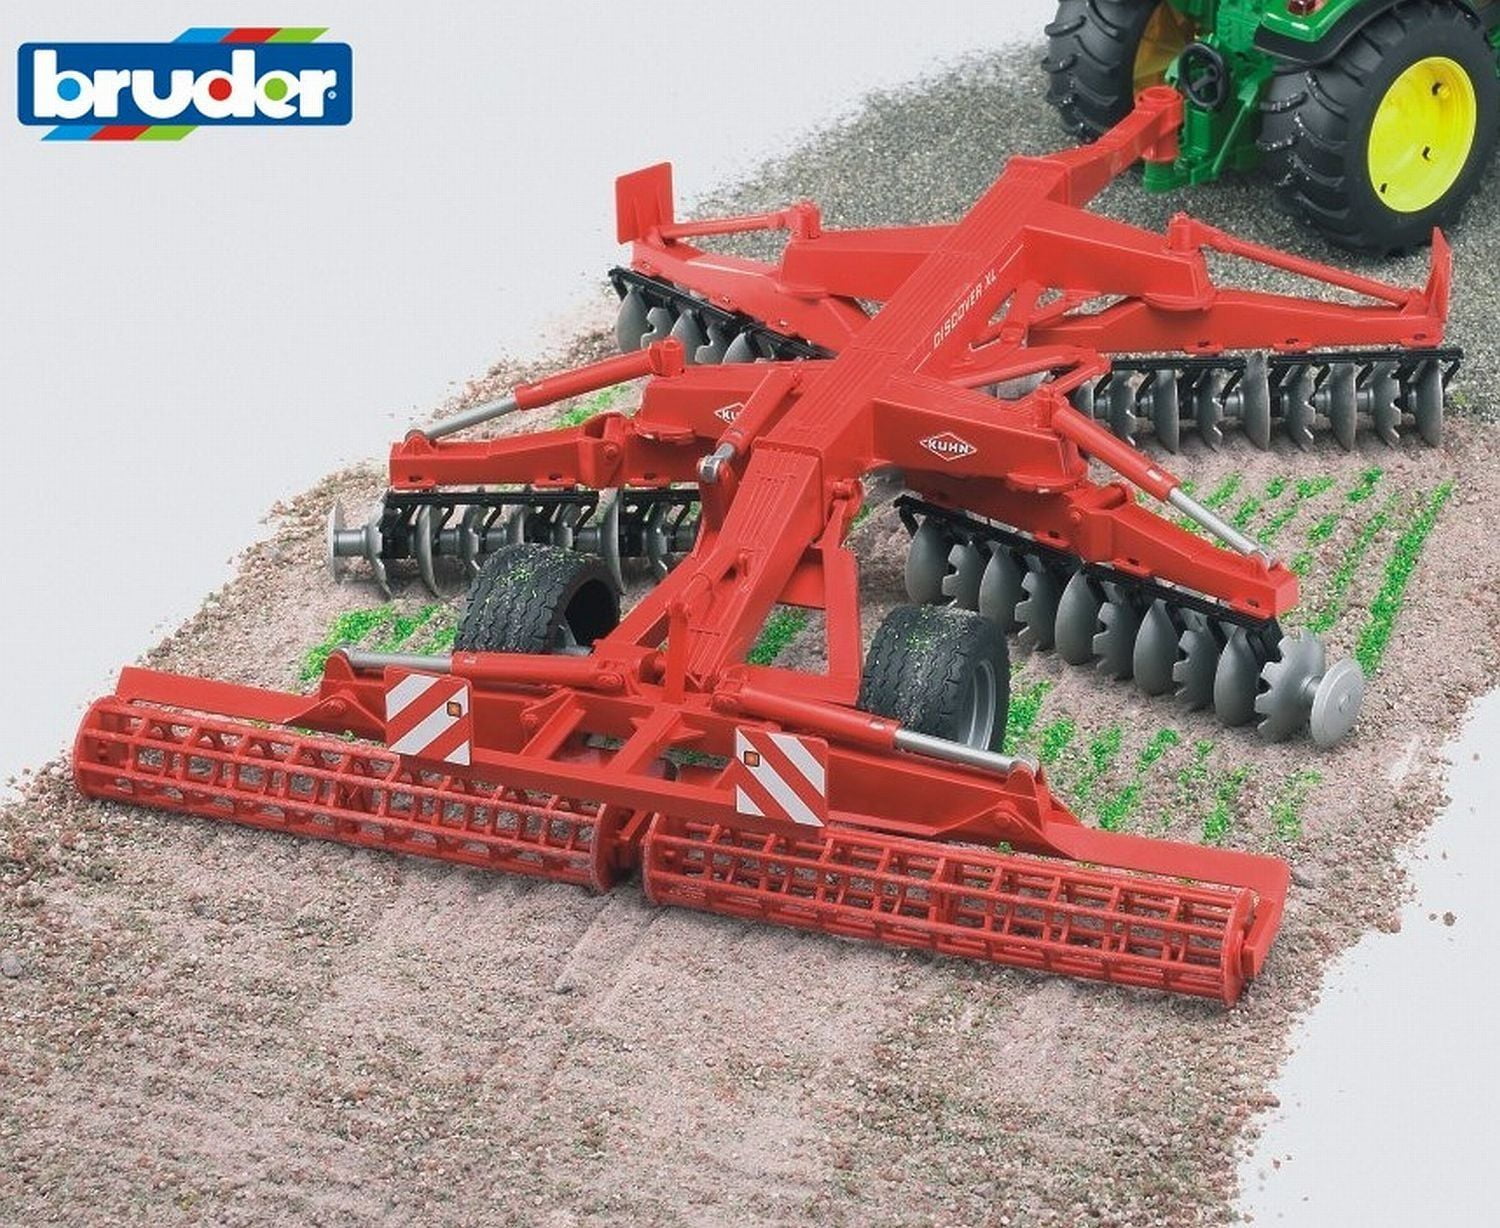 Kuhn Disc Harrow Discover XL by BRUDER 2217 for sale online